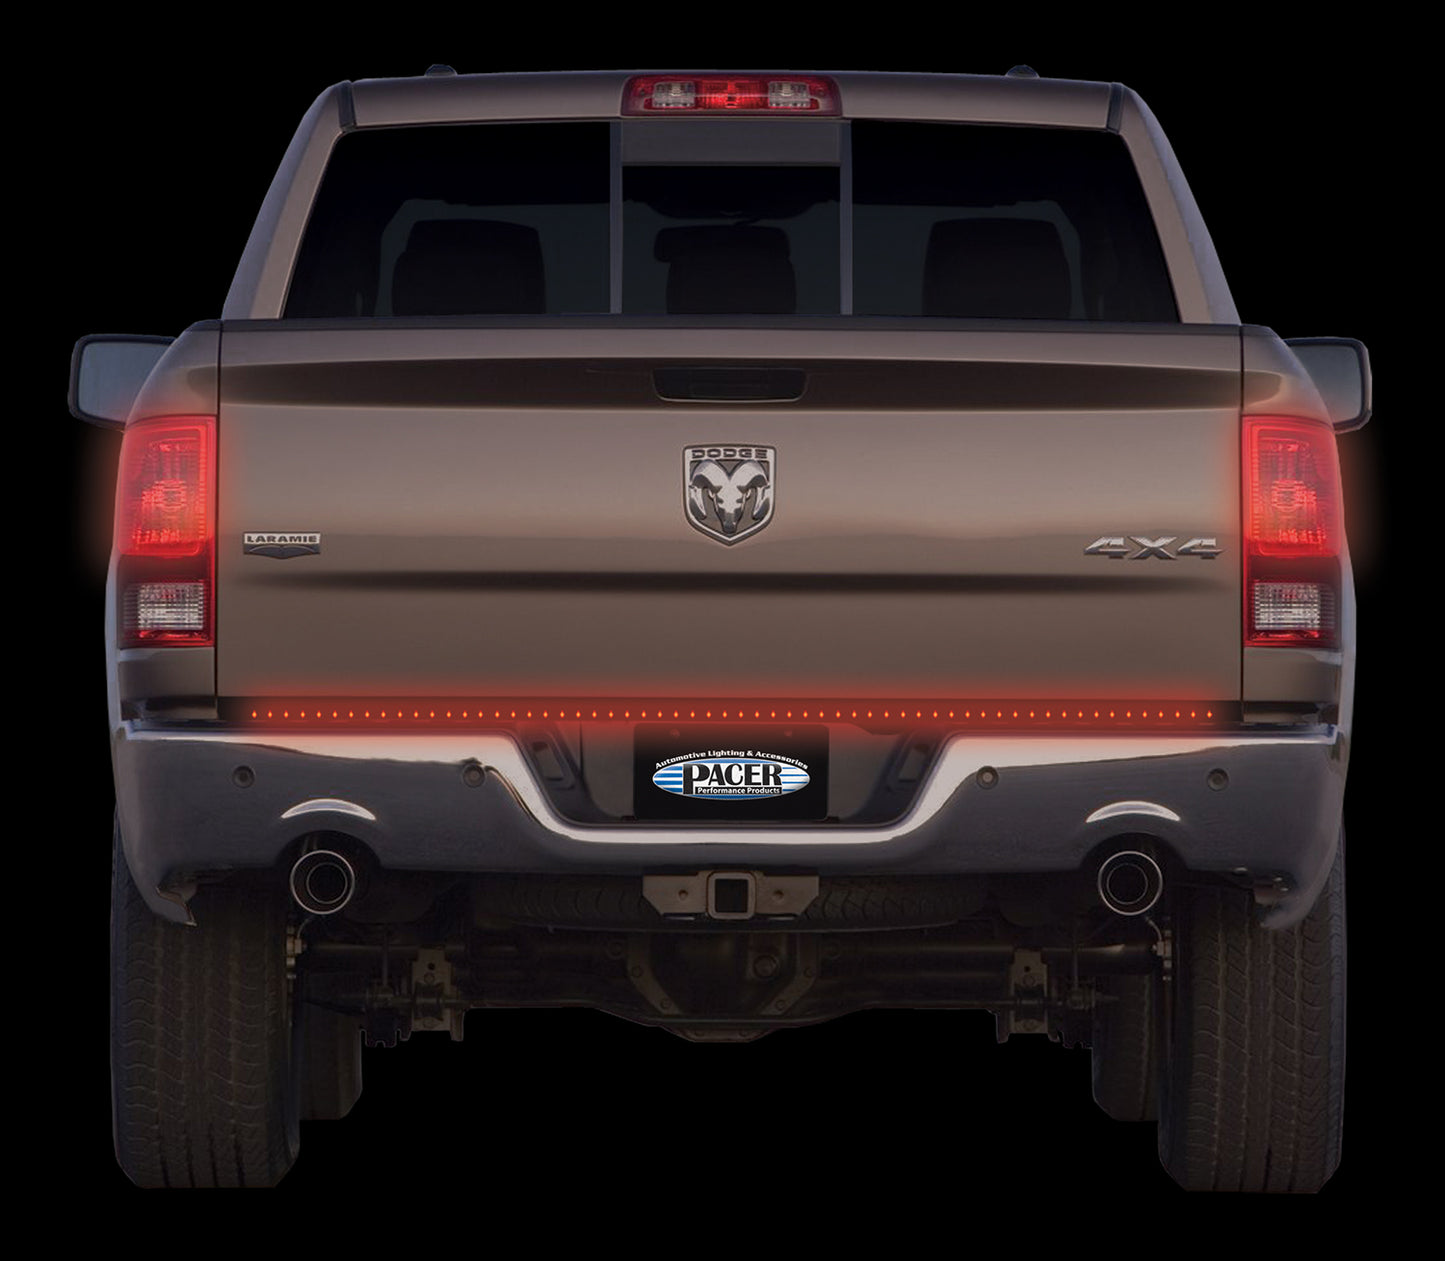 Pacer Performance - 20-801 - Tailgate Light -  20-801 Outback F4 4 Function Red LED Tailgate Bar 60" - P/N: 20-801